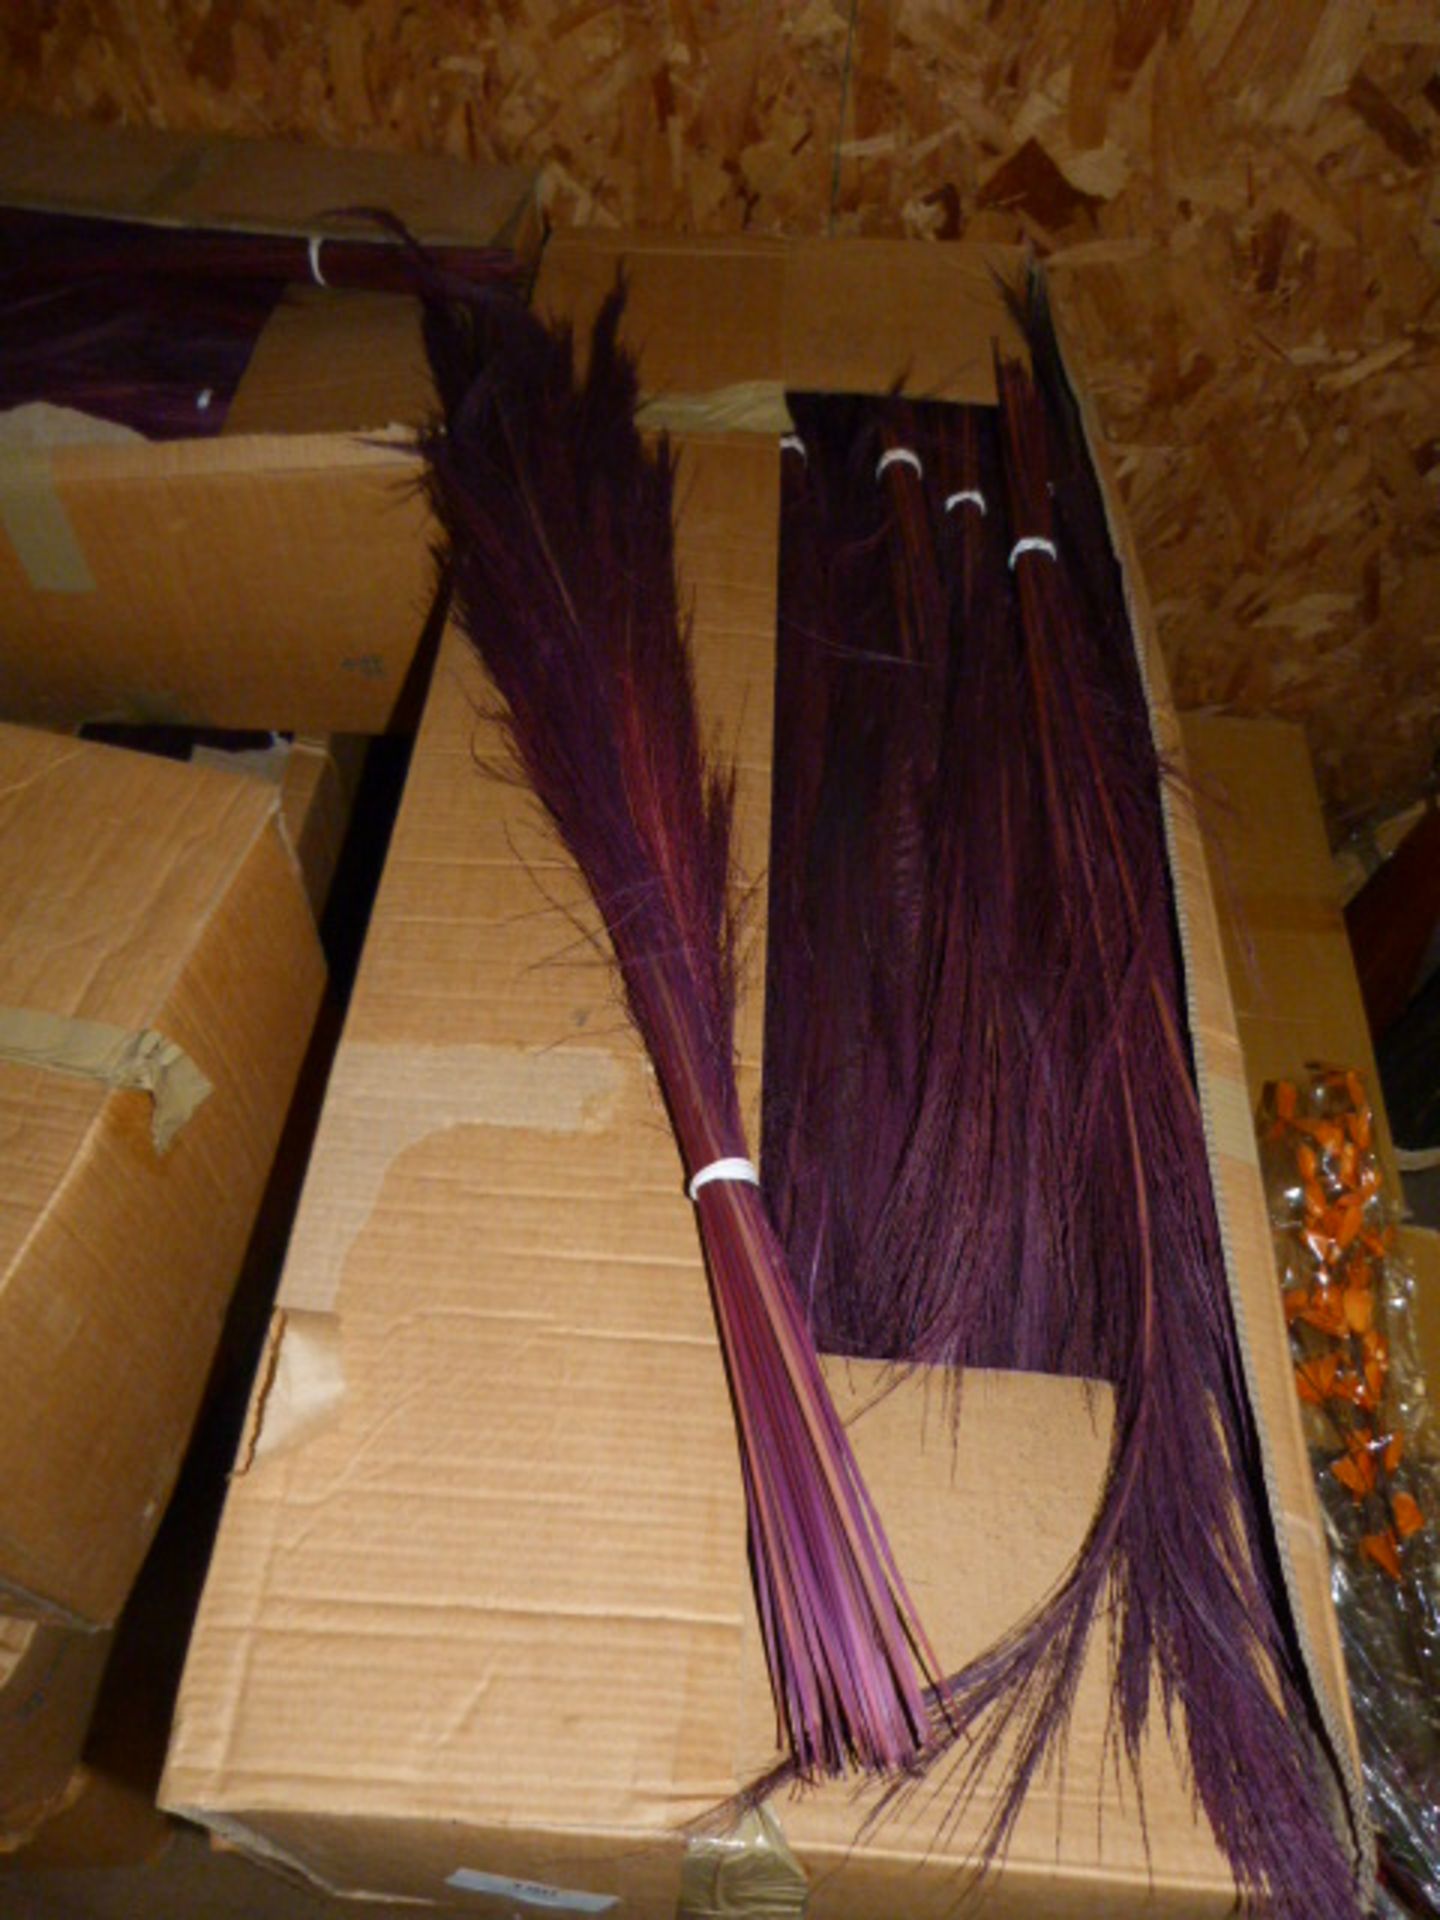 *Box Containing Approximately Thirty Bunches of Purple Broom Grass